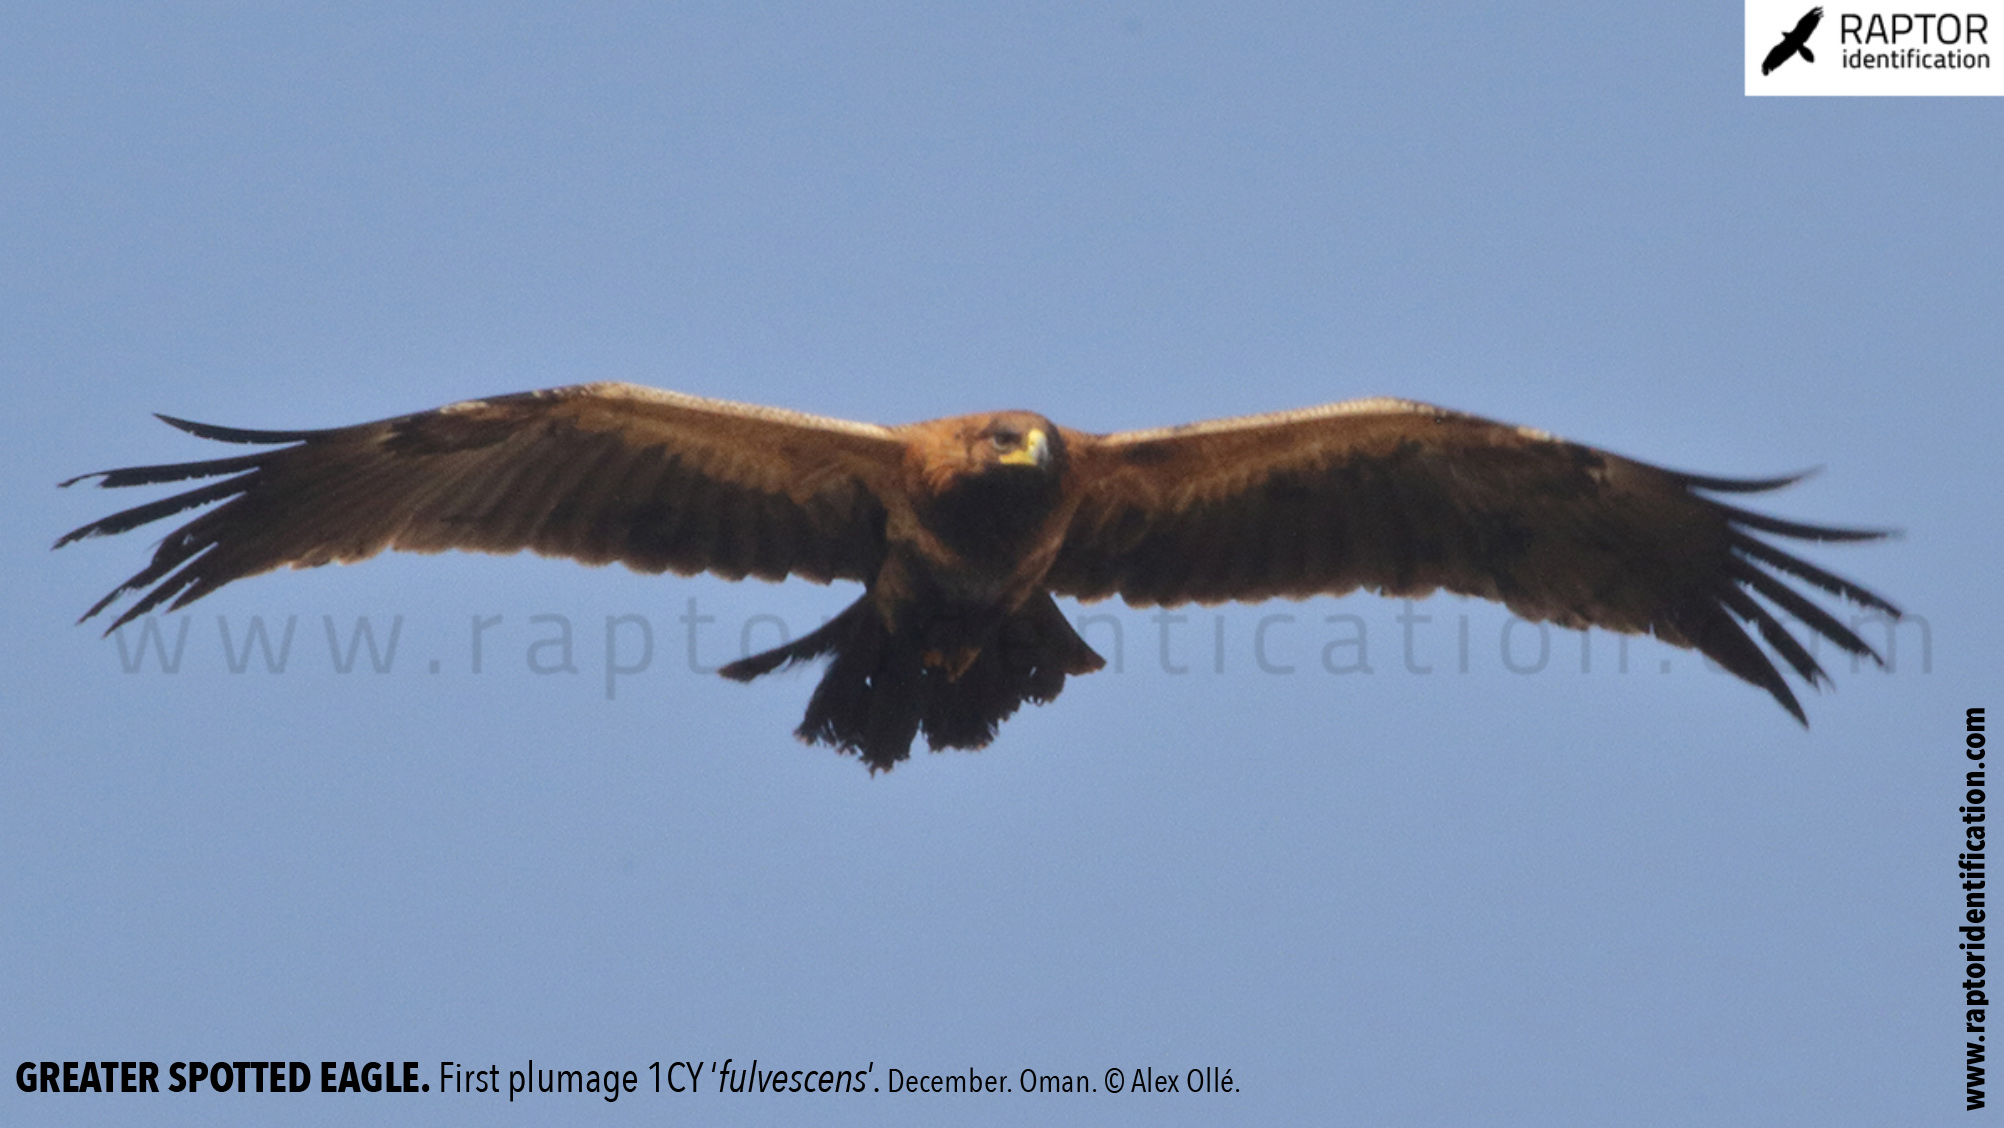 greater-spotted-eagle-identification-juvenile-clanga-clanga